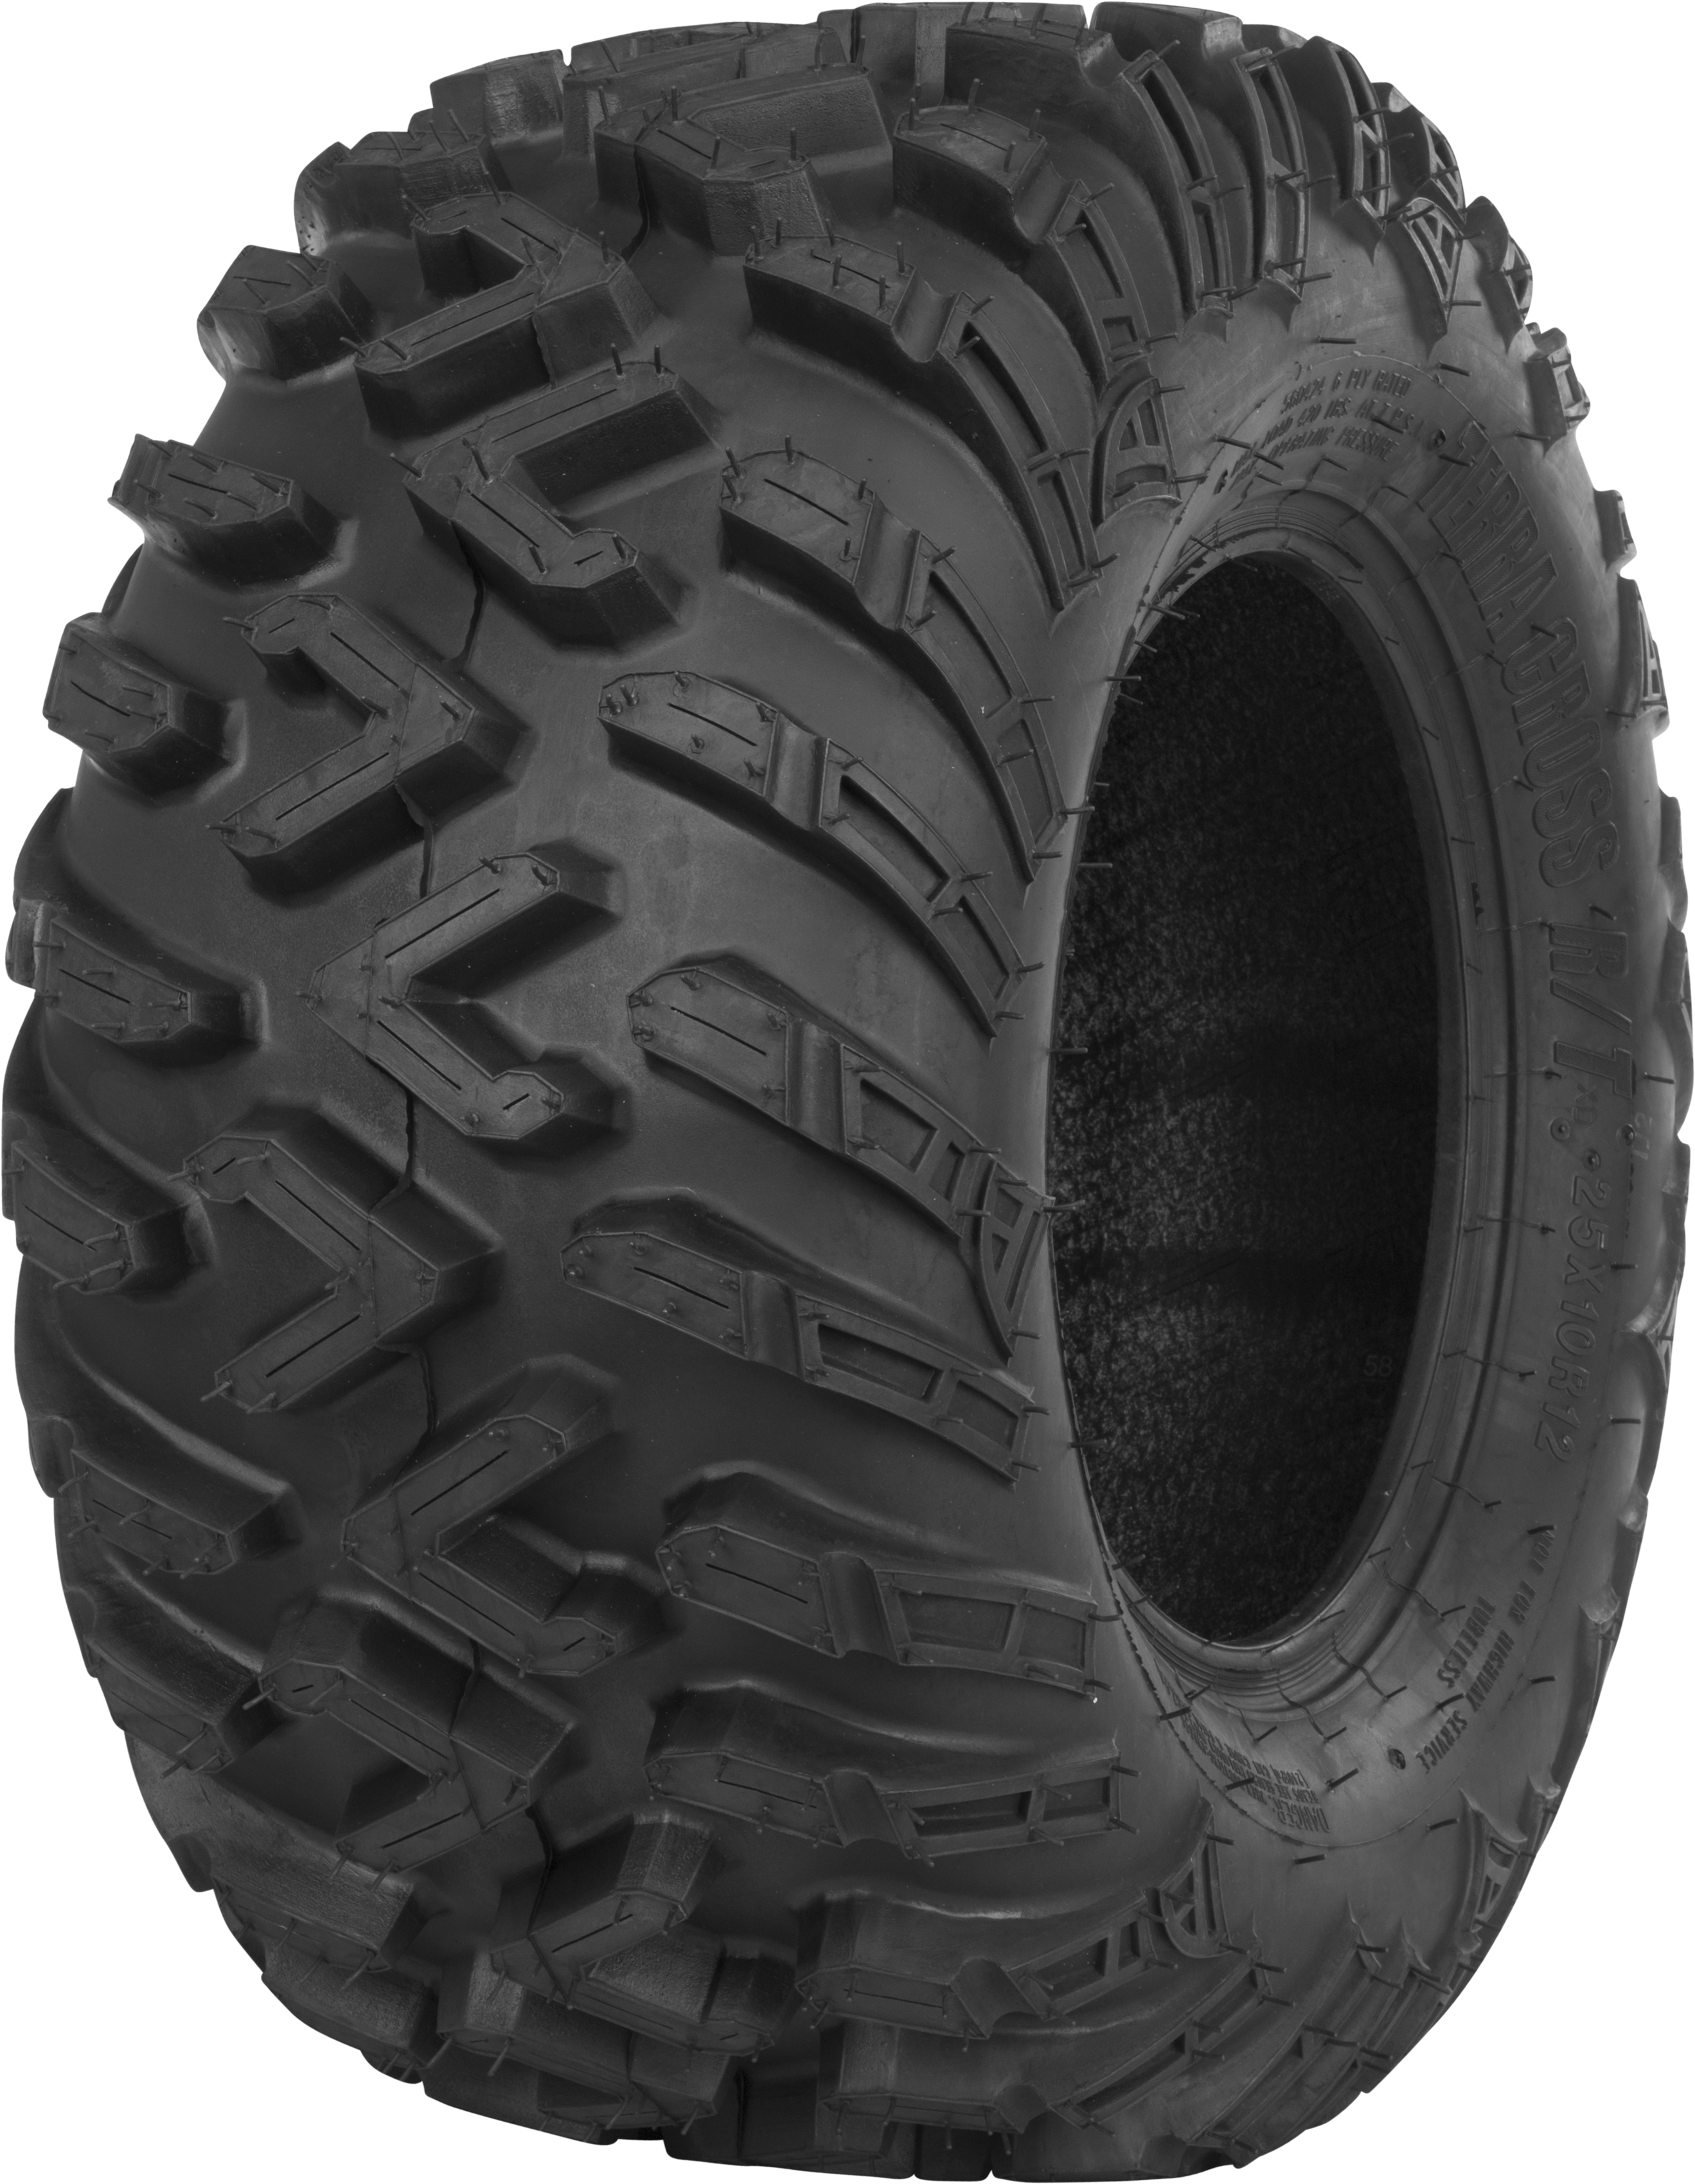 TERRACROSS R/T REAR TIRE 26X11-14 6 -PLY - Click Image to Close